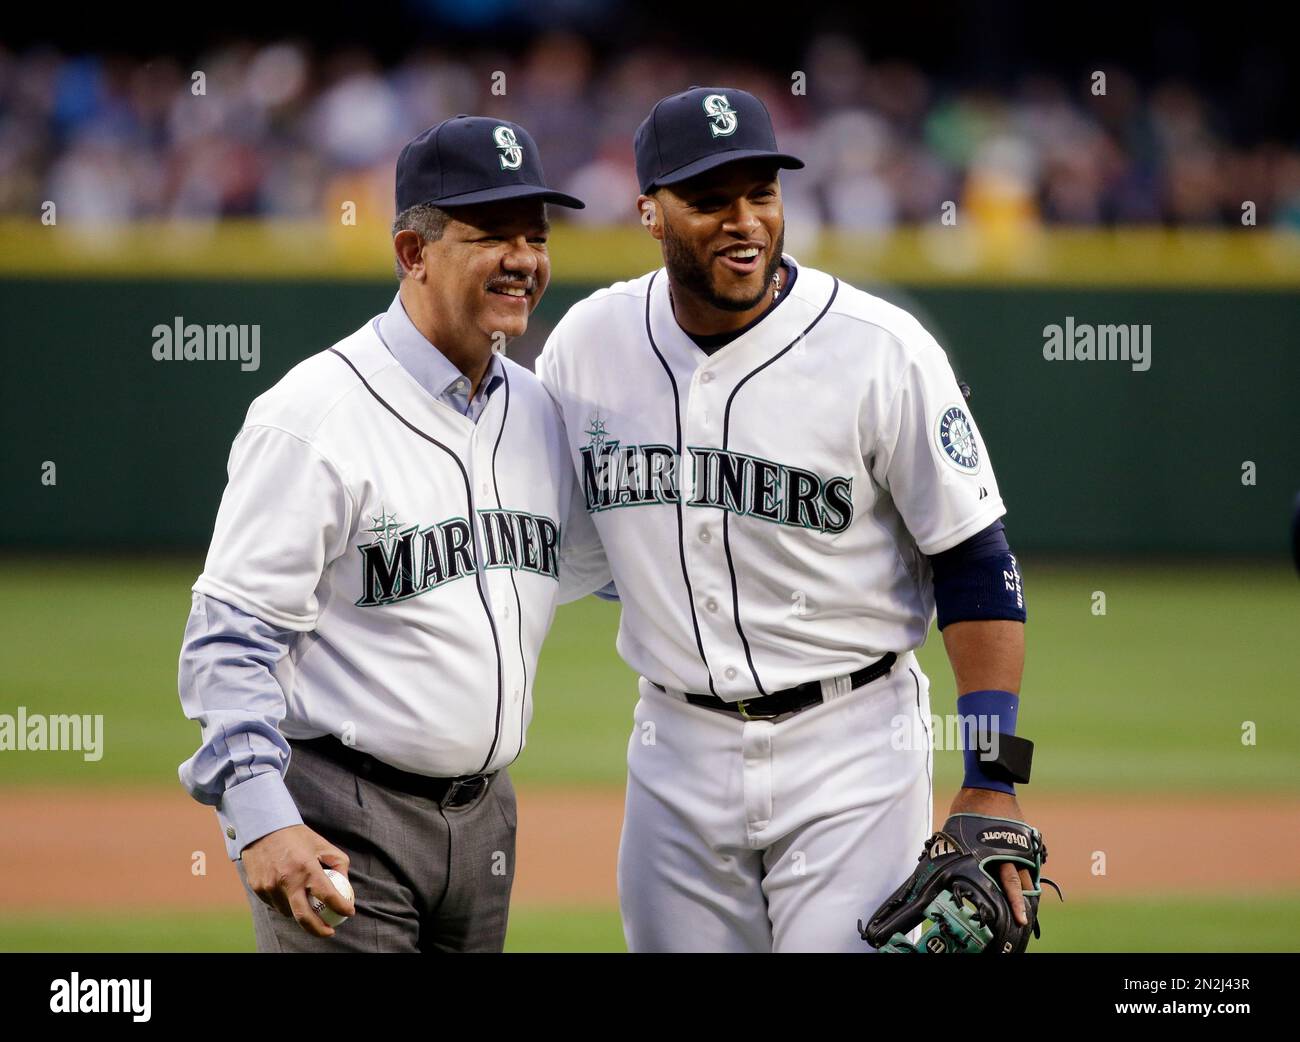 Former Dominican Republic President Leonel Fernandez, left, smiles as he stands with Seattle Mariners' Robinson Cano after Fernandez threw out the ceremonial first pitch before a baseball game between the Mariners and the Los Angeles Angels Tuesday, April 7, 2015, in Seattle. (AP Photo/Elaine Thompson) Stock Photo